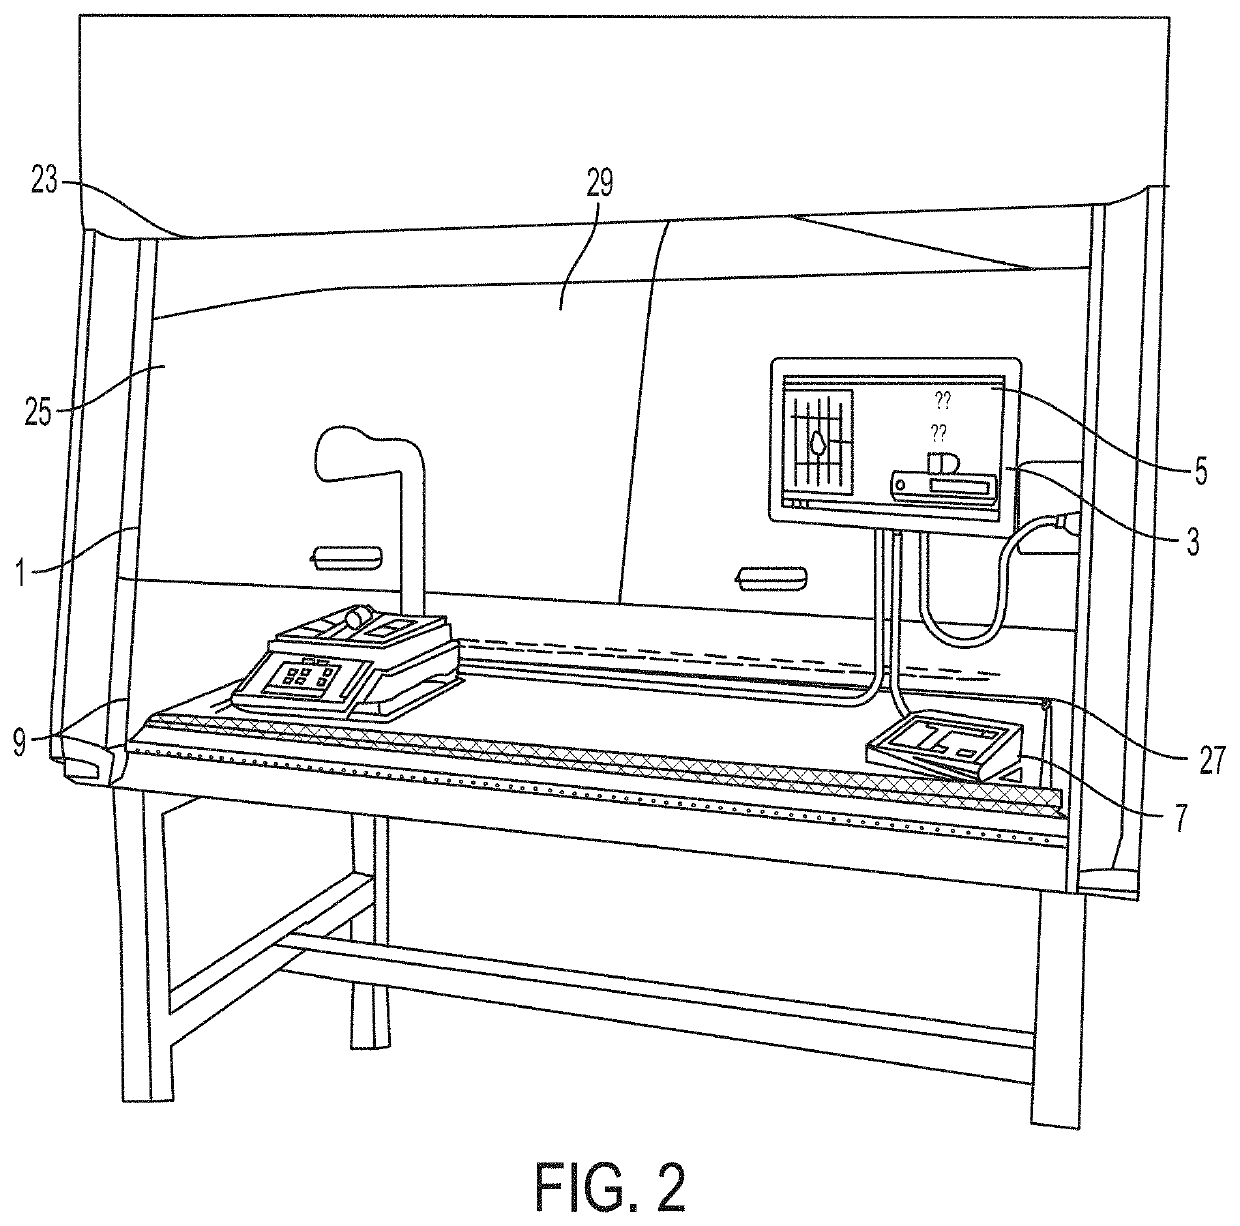 Aerodynamically streamlined enclosure for input devices of a medication preparation system